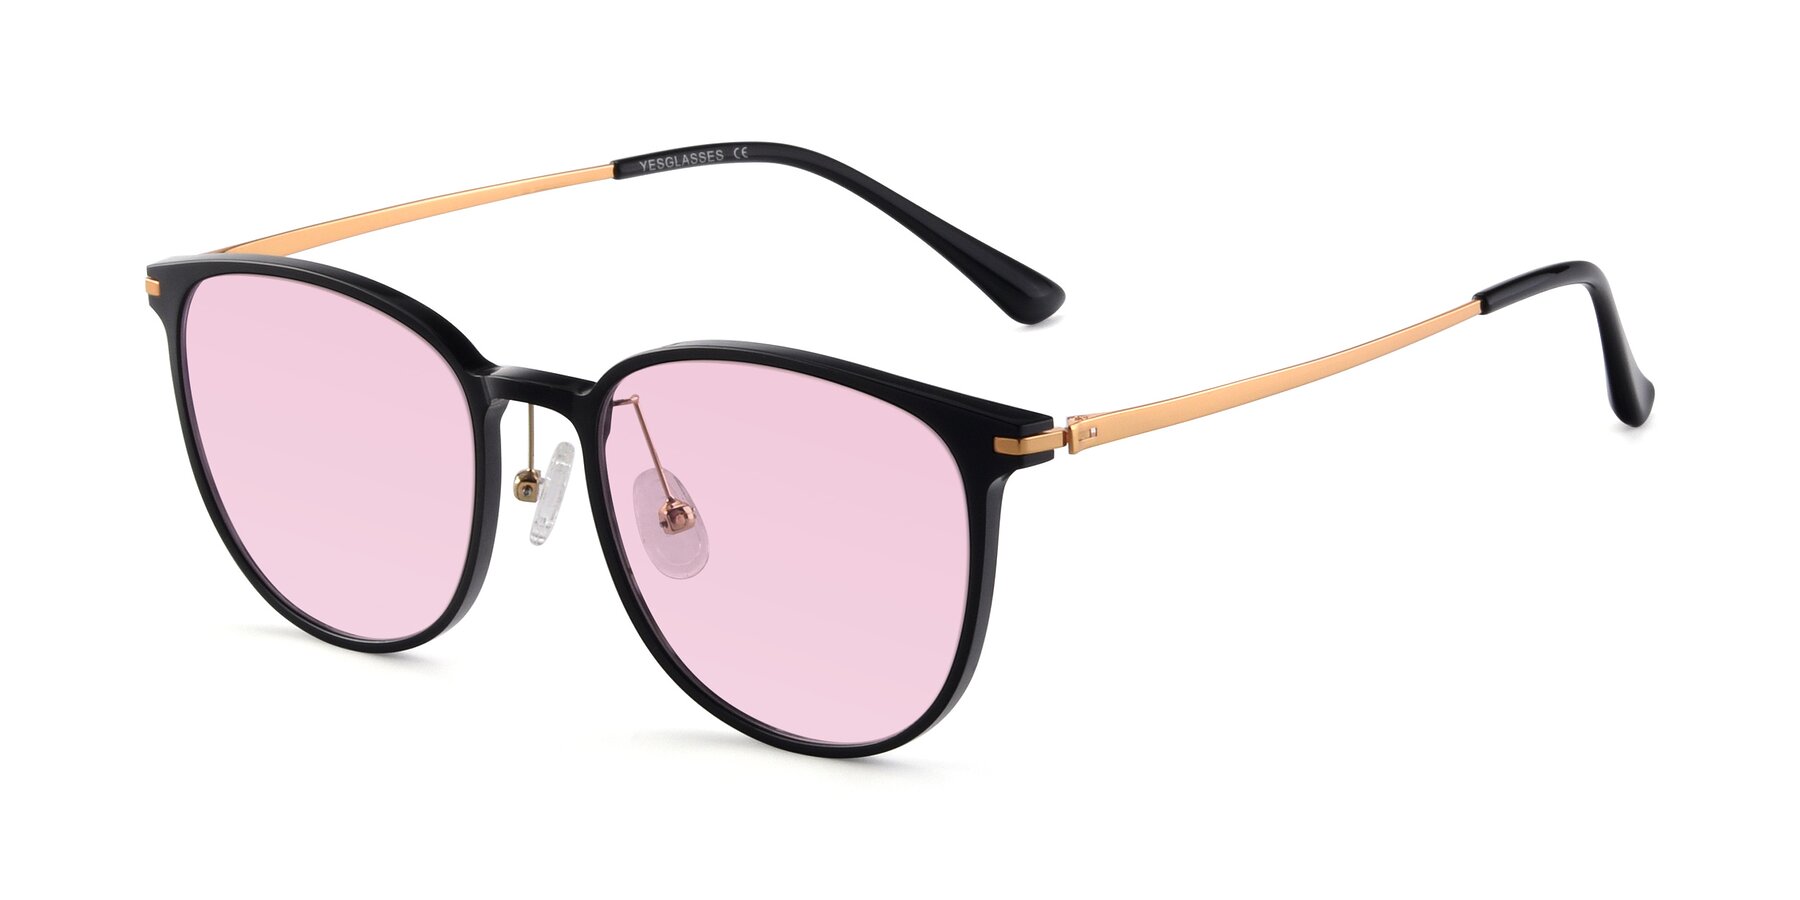 Angle of Justice in Black with Light Pink Tinted Lenses